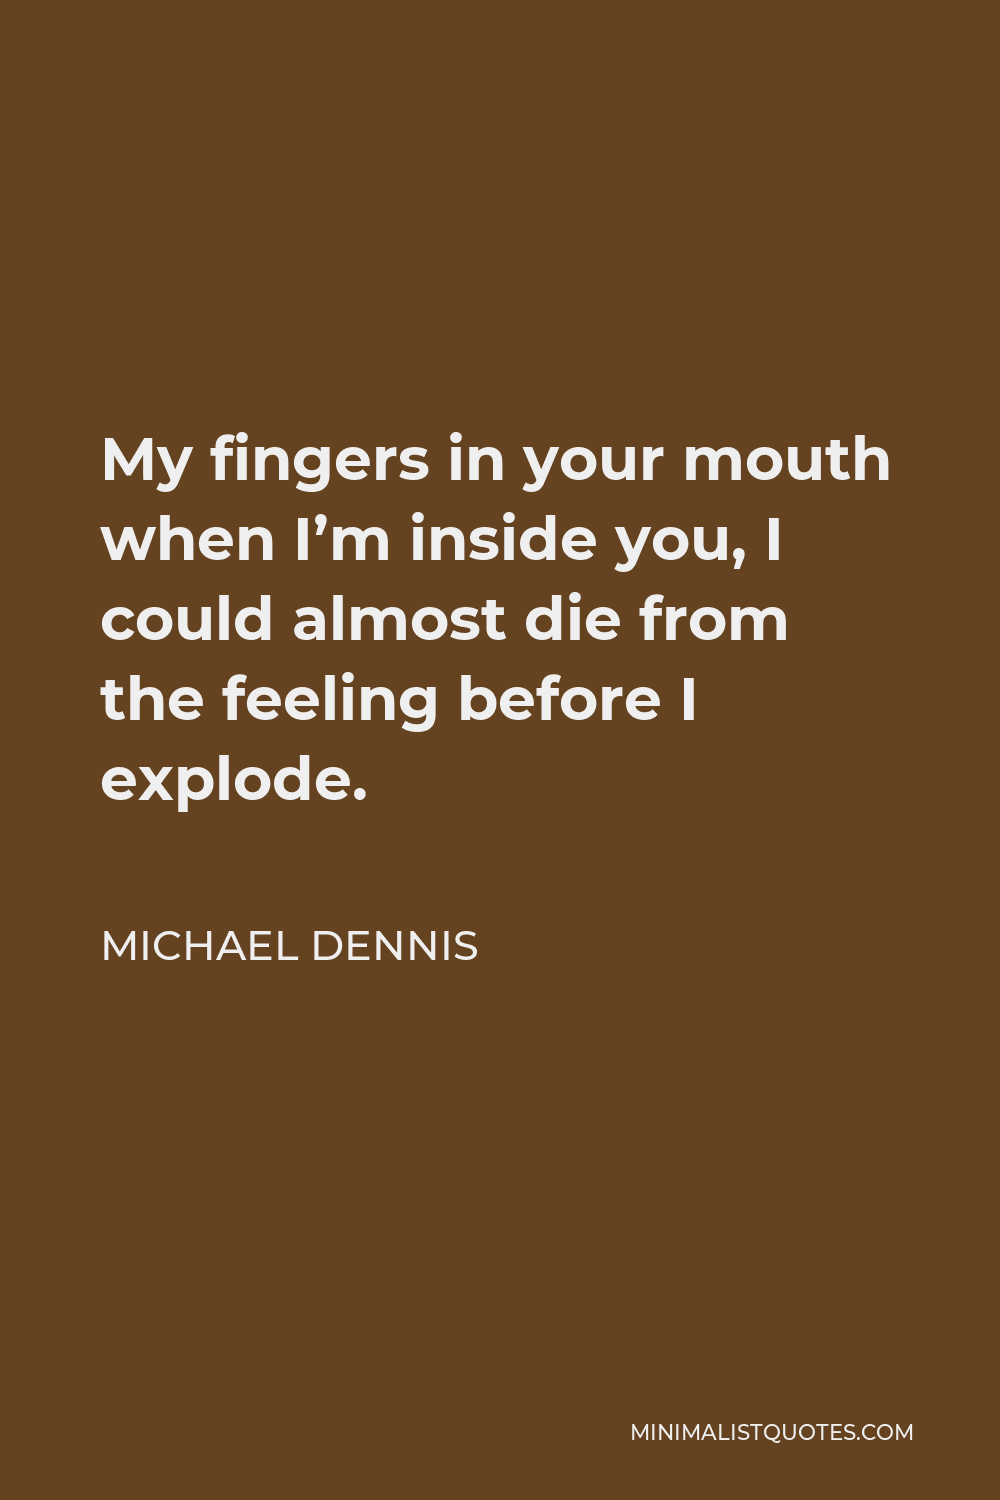 Michael Dennis Quote - My fingers in your mouth when I’m inside you, I could almost die from the feeling before I explode.